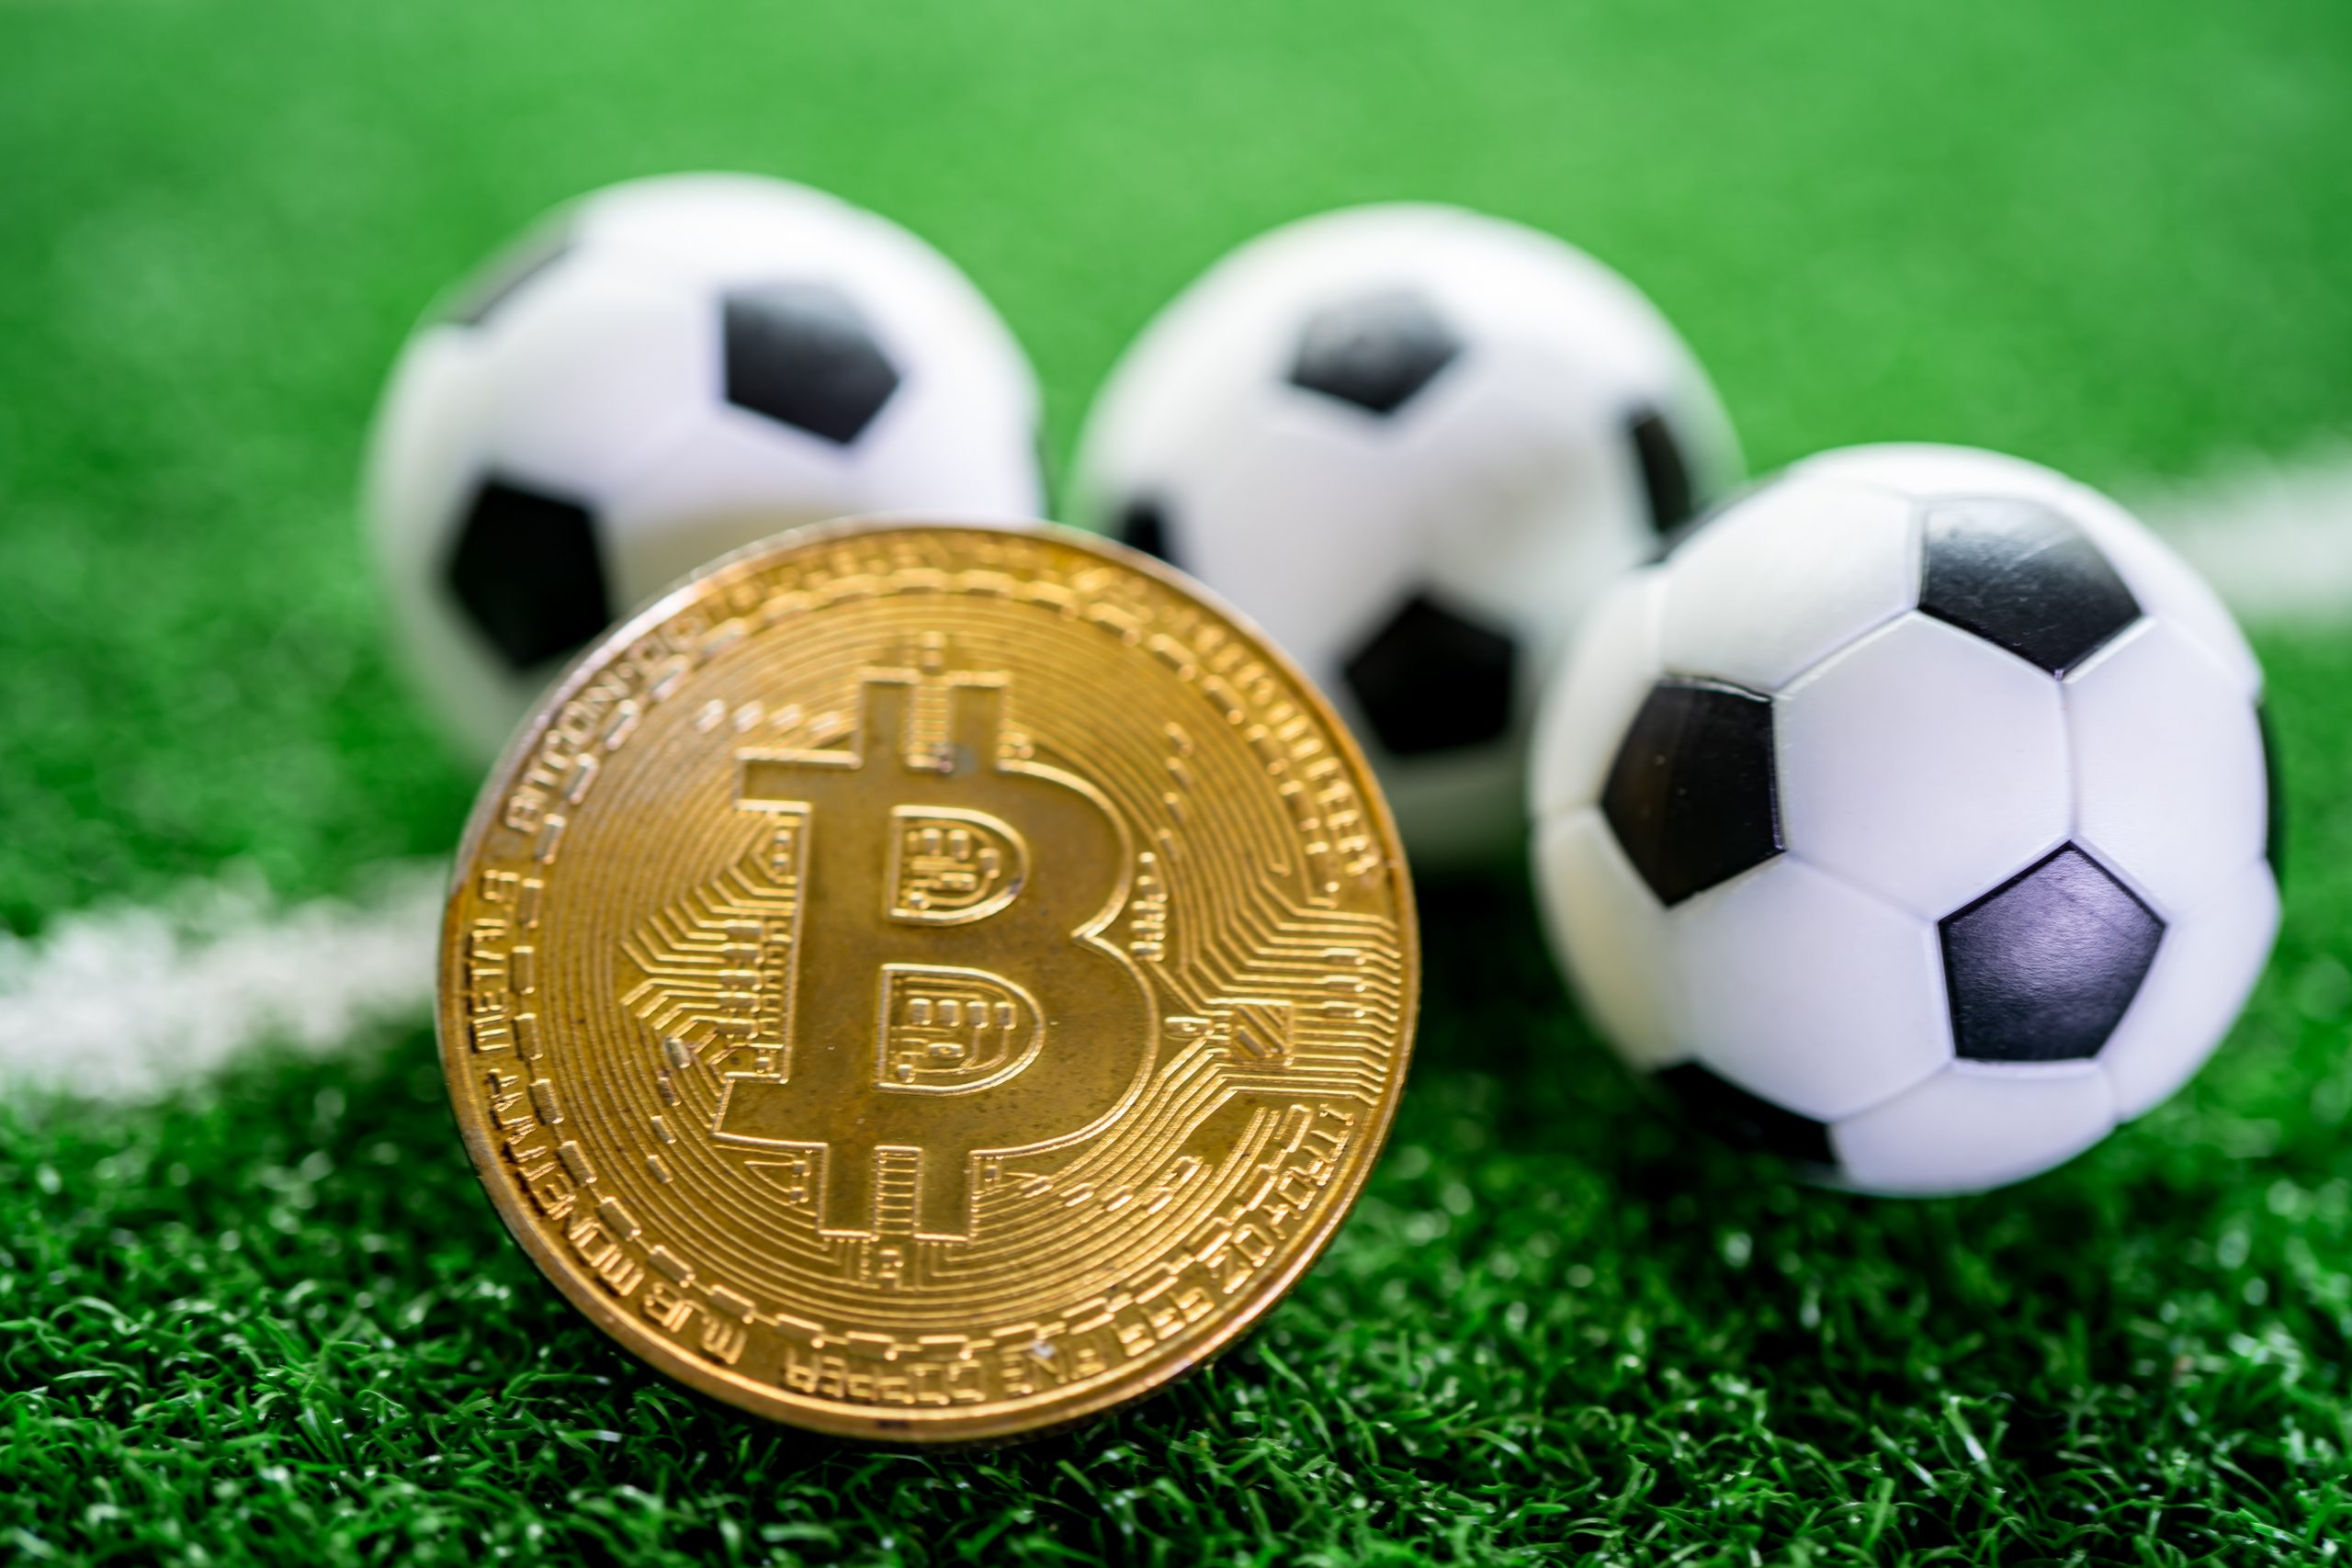 Argentine Football Club Welcomes First Crypto Signing
